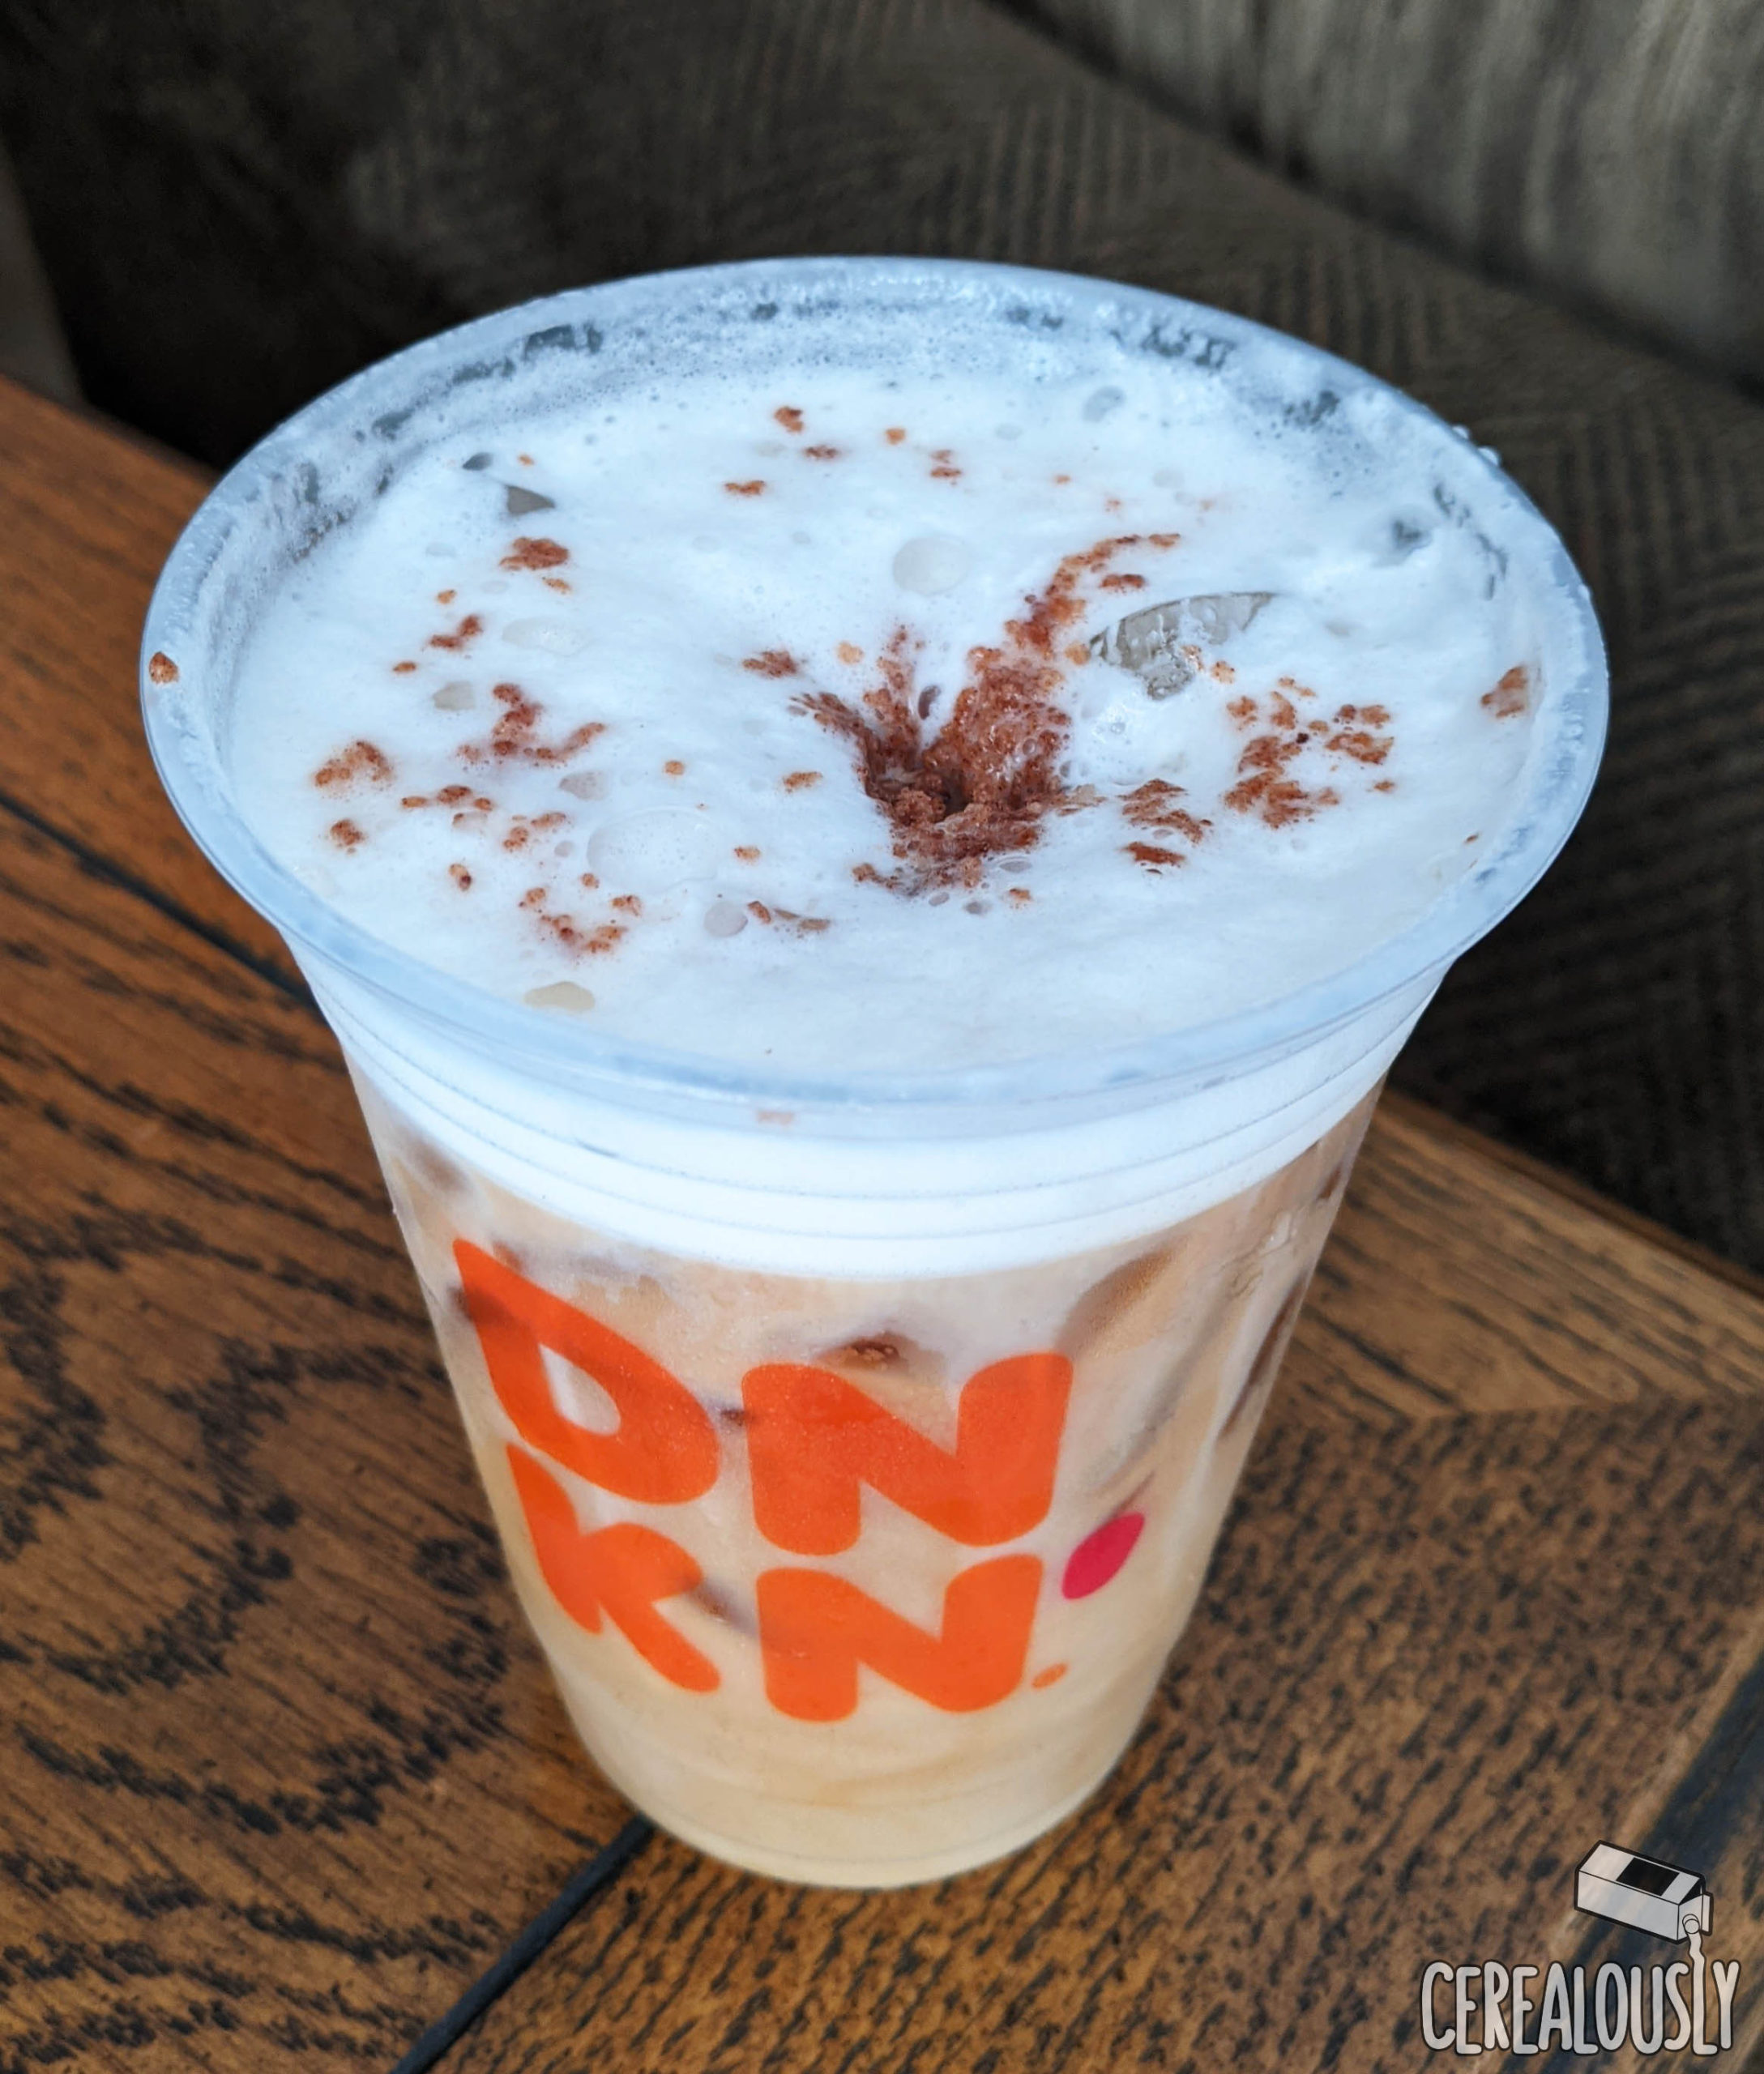 https://www.cerealously.net/wp-content/uploads/2021/09/dunkin-cereal-milk-latte-review-cinnamon-scaled.jpg